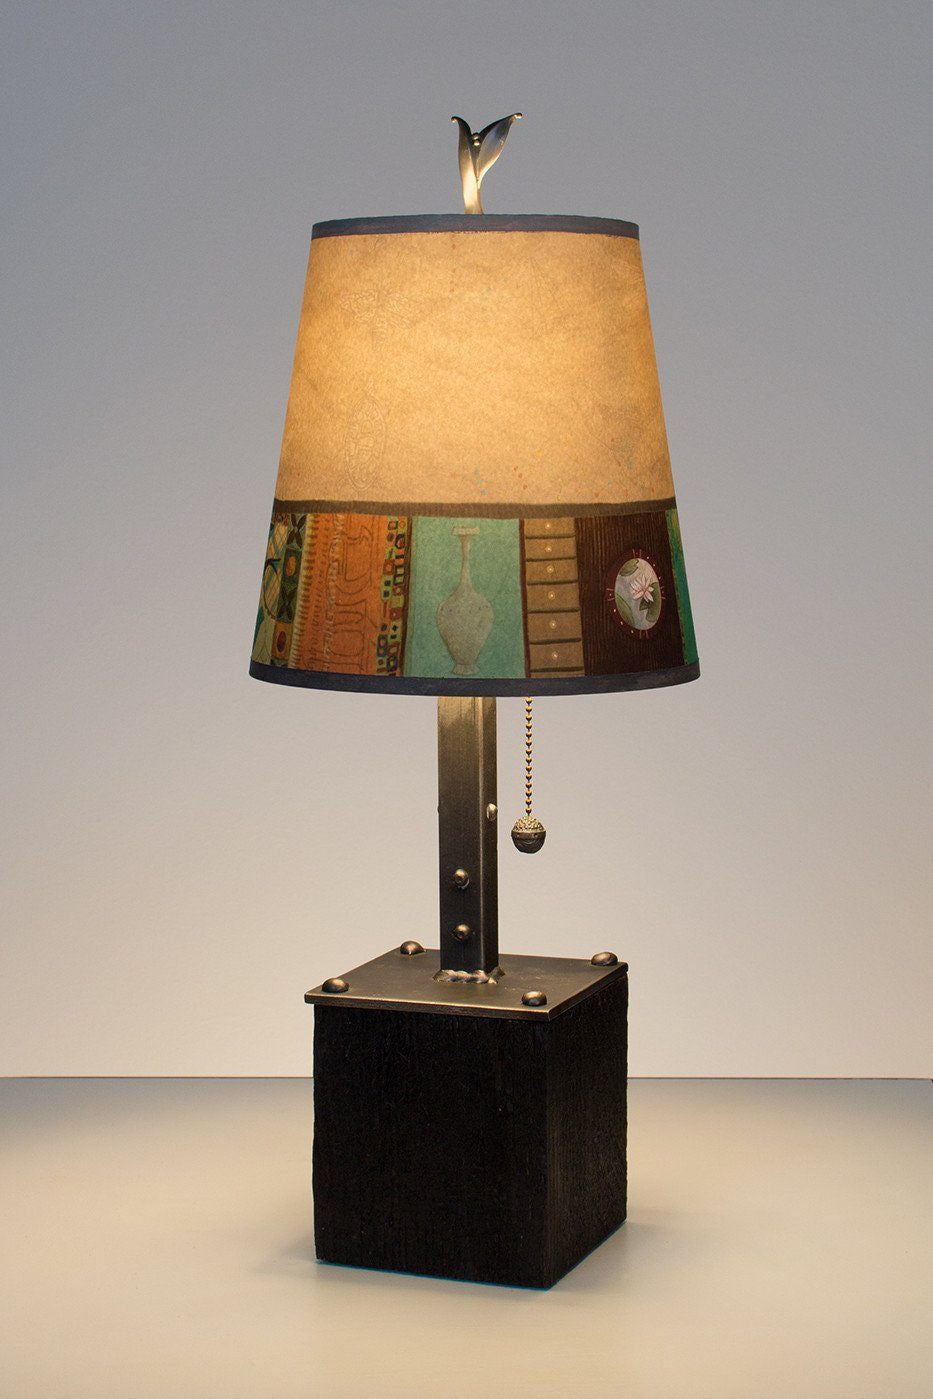 Steel Table Lamp on Reclaimed Wood with Small Drum Shade in Linen Match Lit